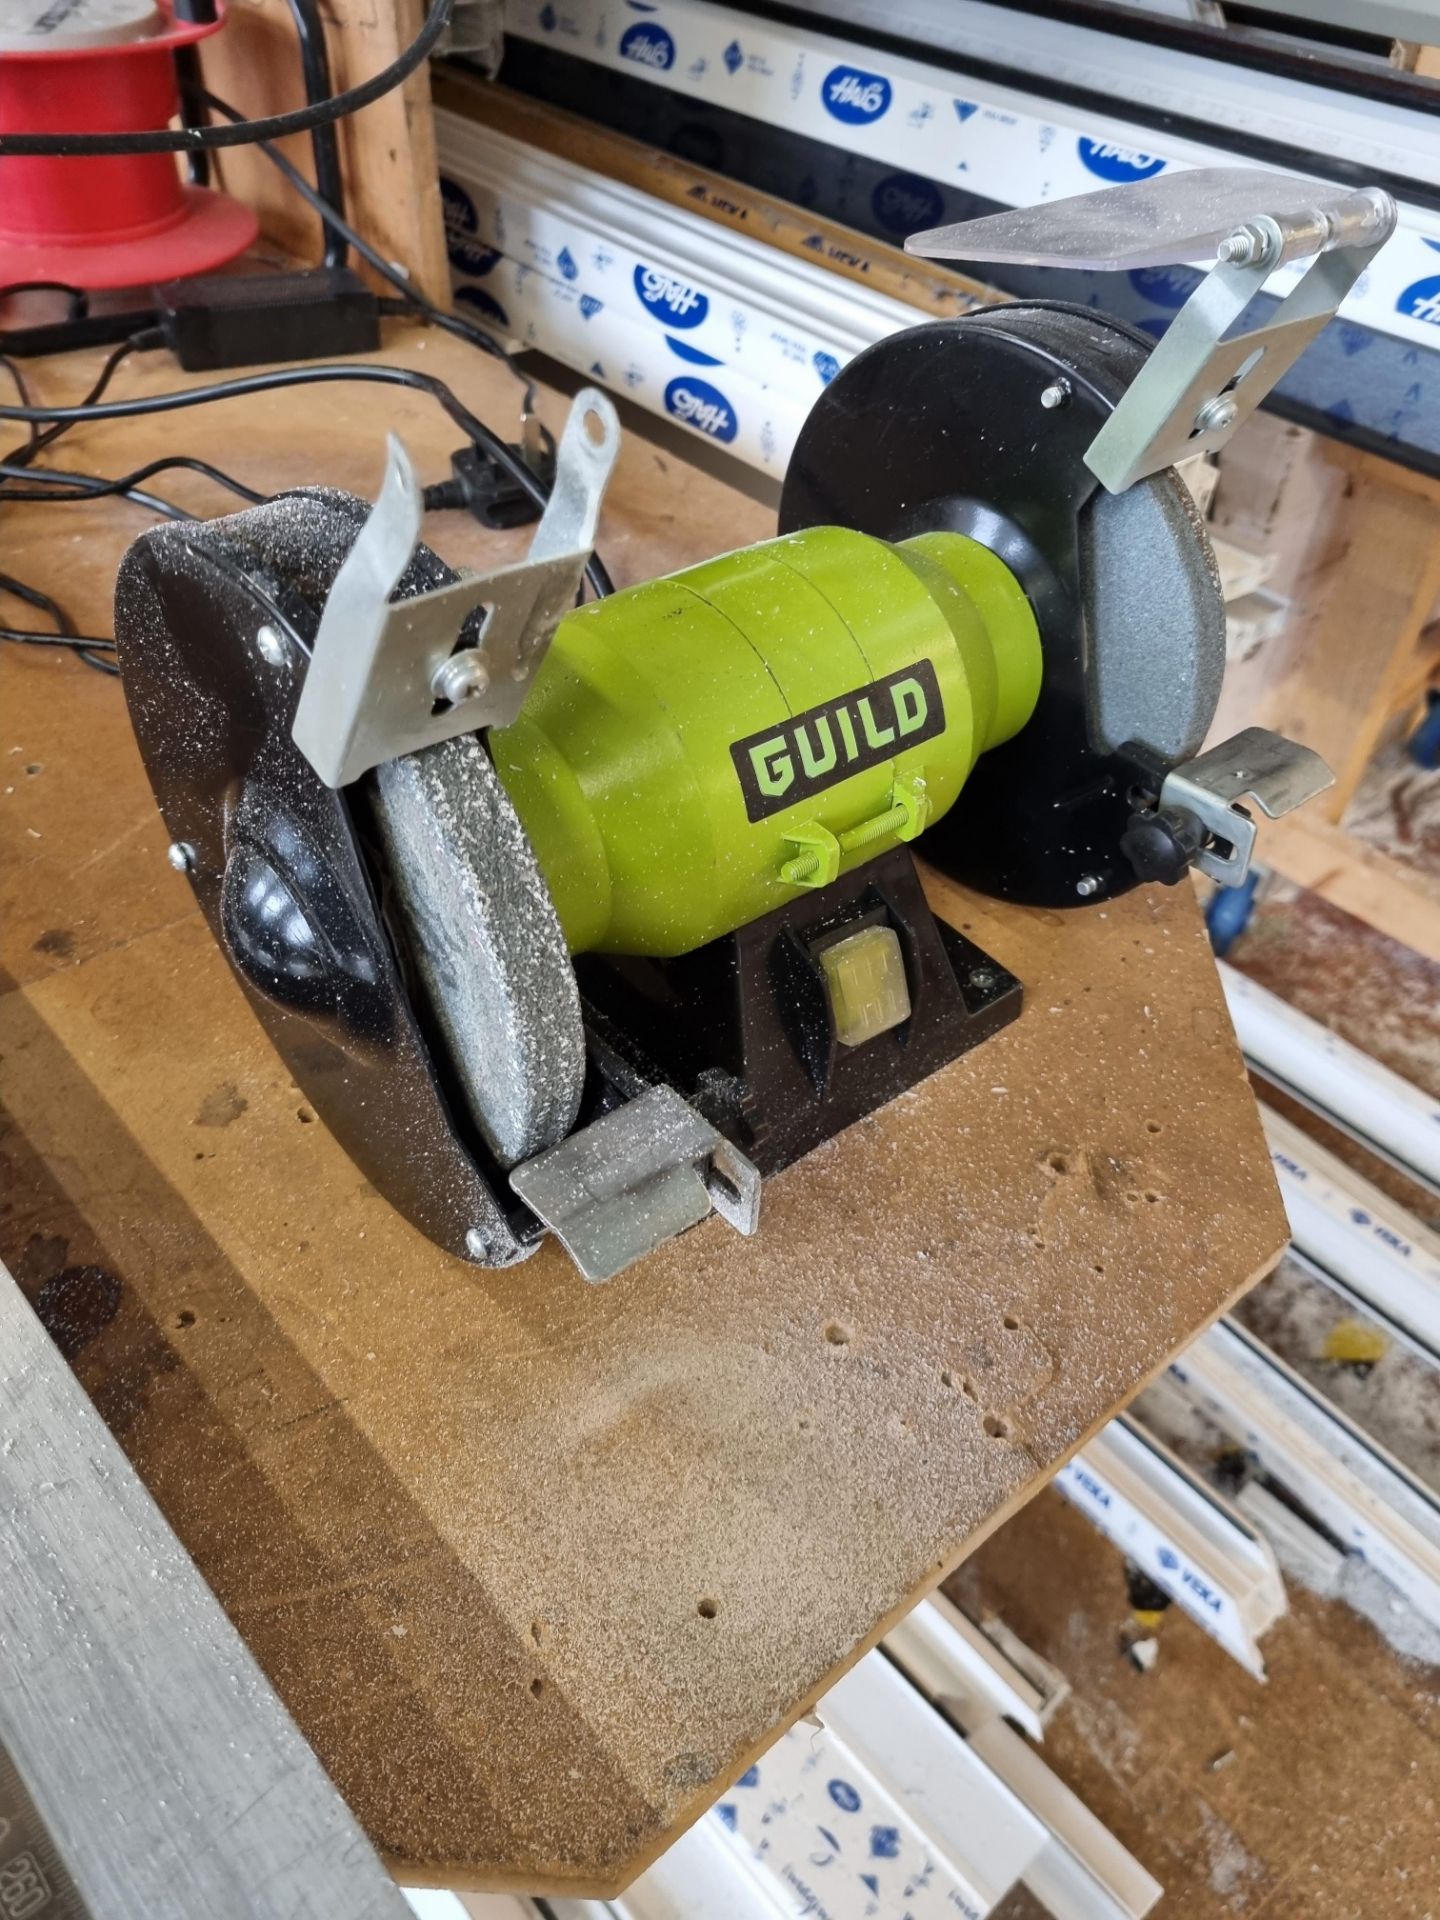 Compound mitre saw and a Guild double ended bench grinder - Bild 2 aus 2